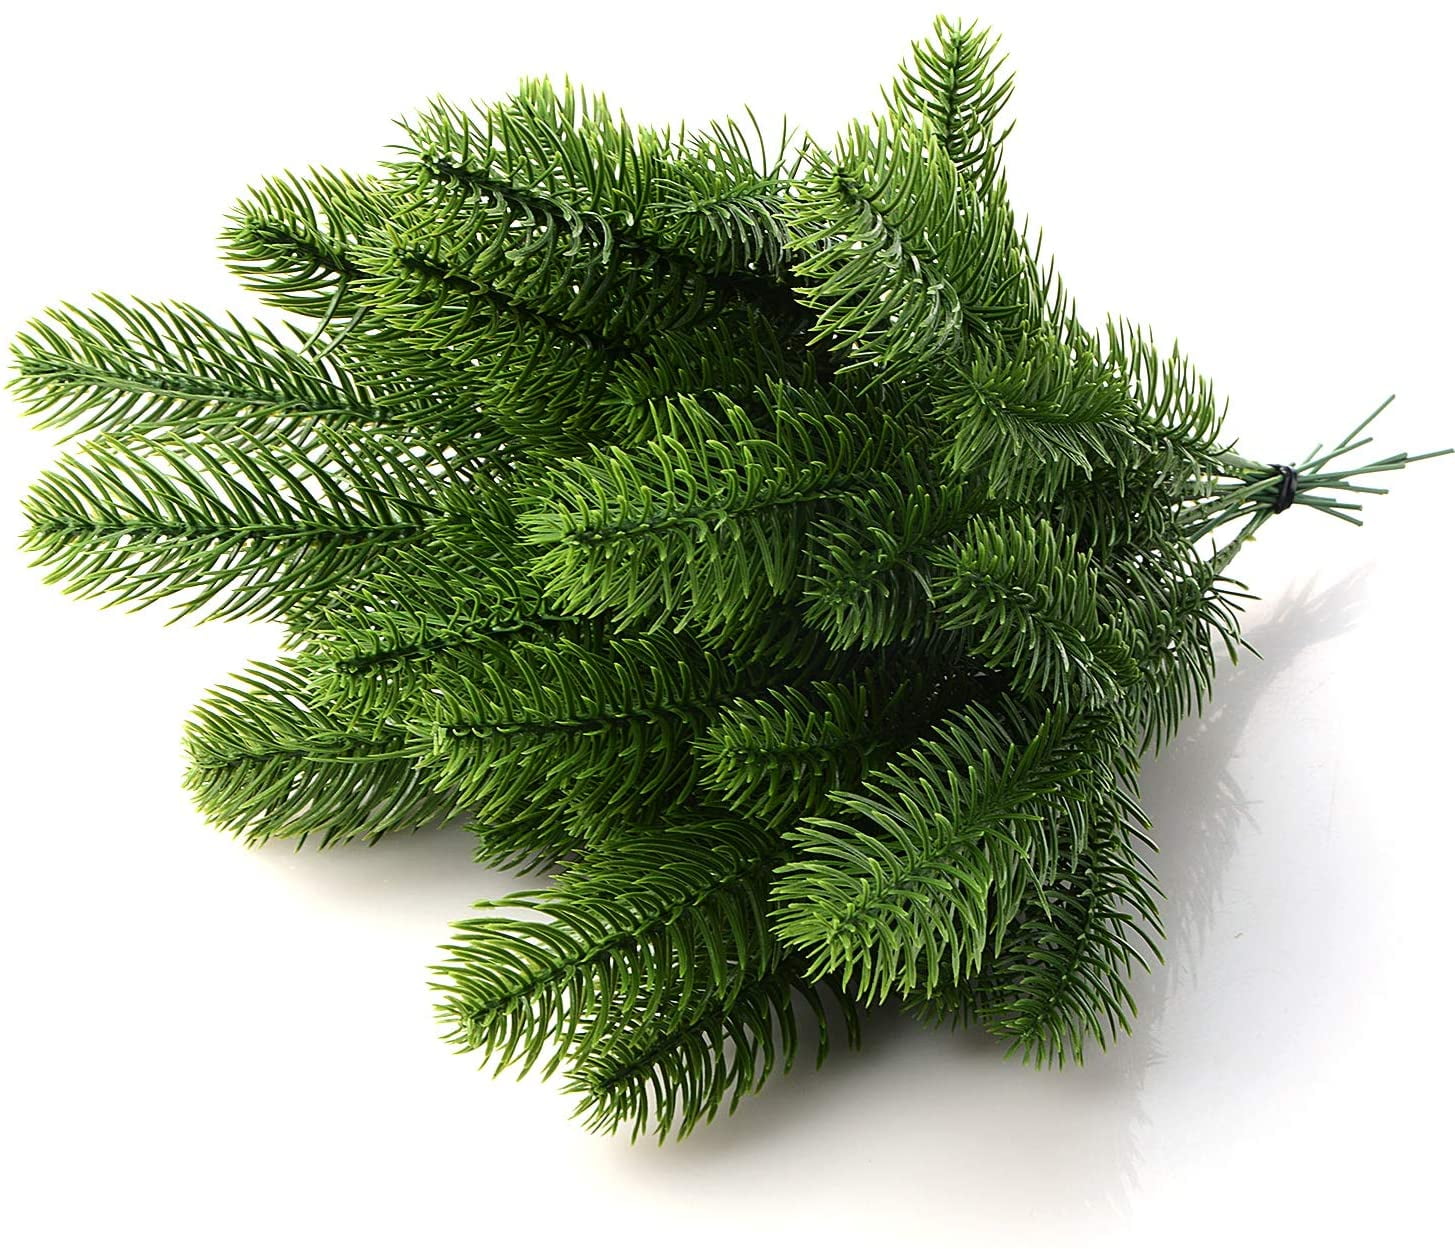 ESA Supplies Artificial Pine Needles Branches Craft Green Garland 20 Pcs for Christmas Holidy Home Garden Office Decorating and Flower Arrangement